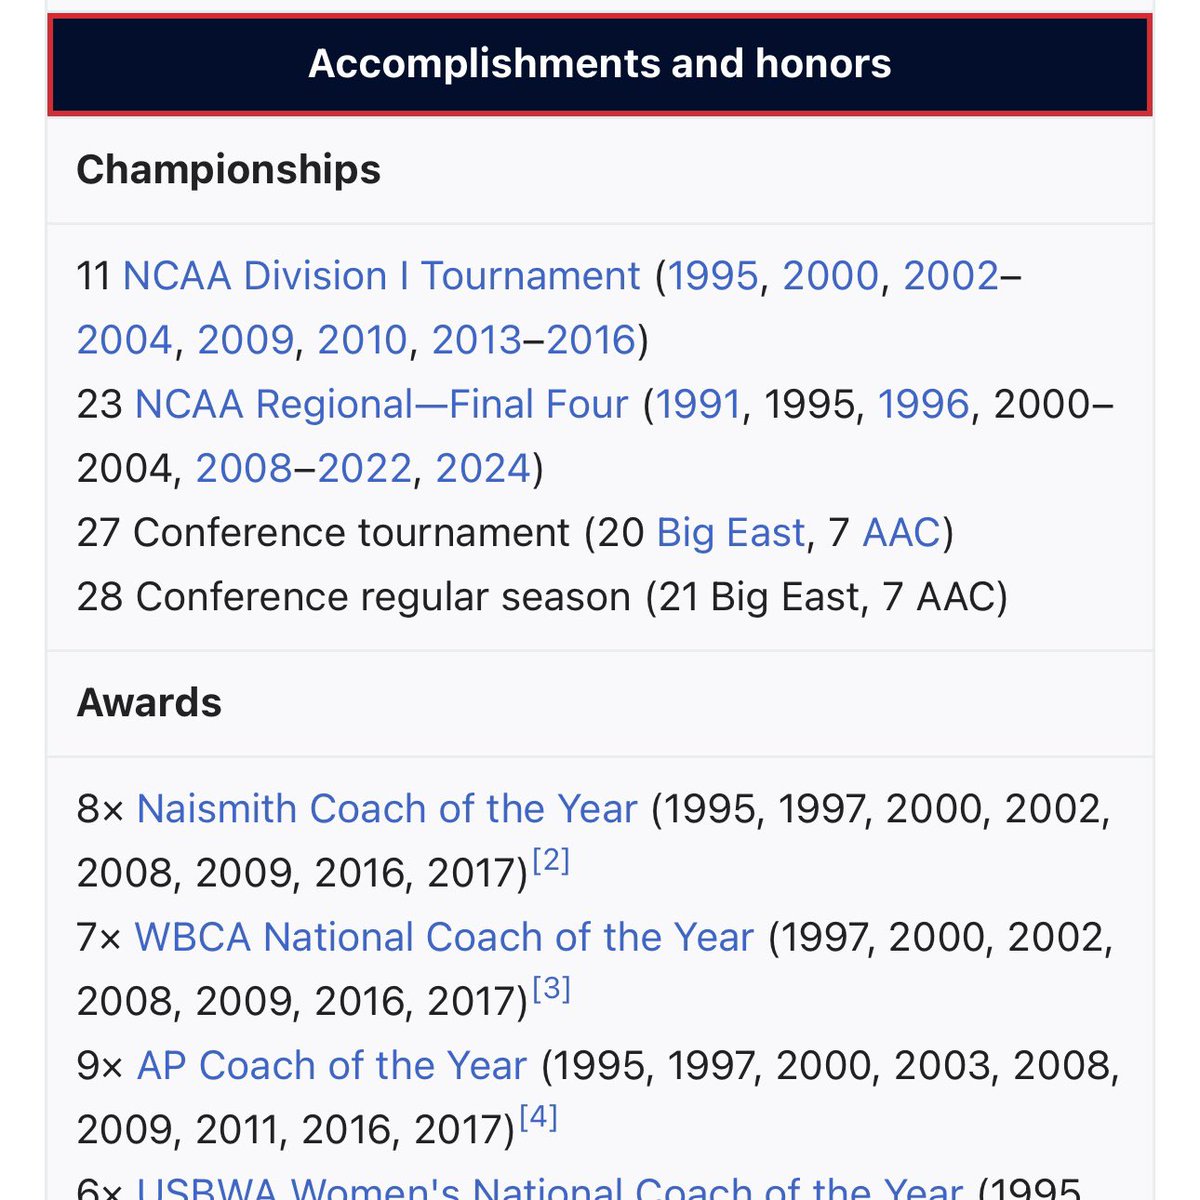 Congrats to Dan Hurley and the UConn Huskies, but last I checked Gino Auriemma was the first UConn basketball coach to go back to back… Oh and the first time was back to back to back and the second time was back to back to back to back 🤷🏼‍♀️